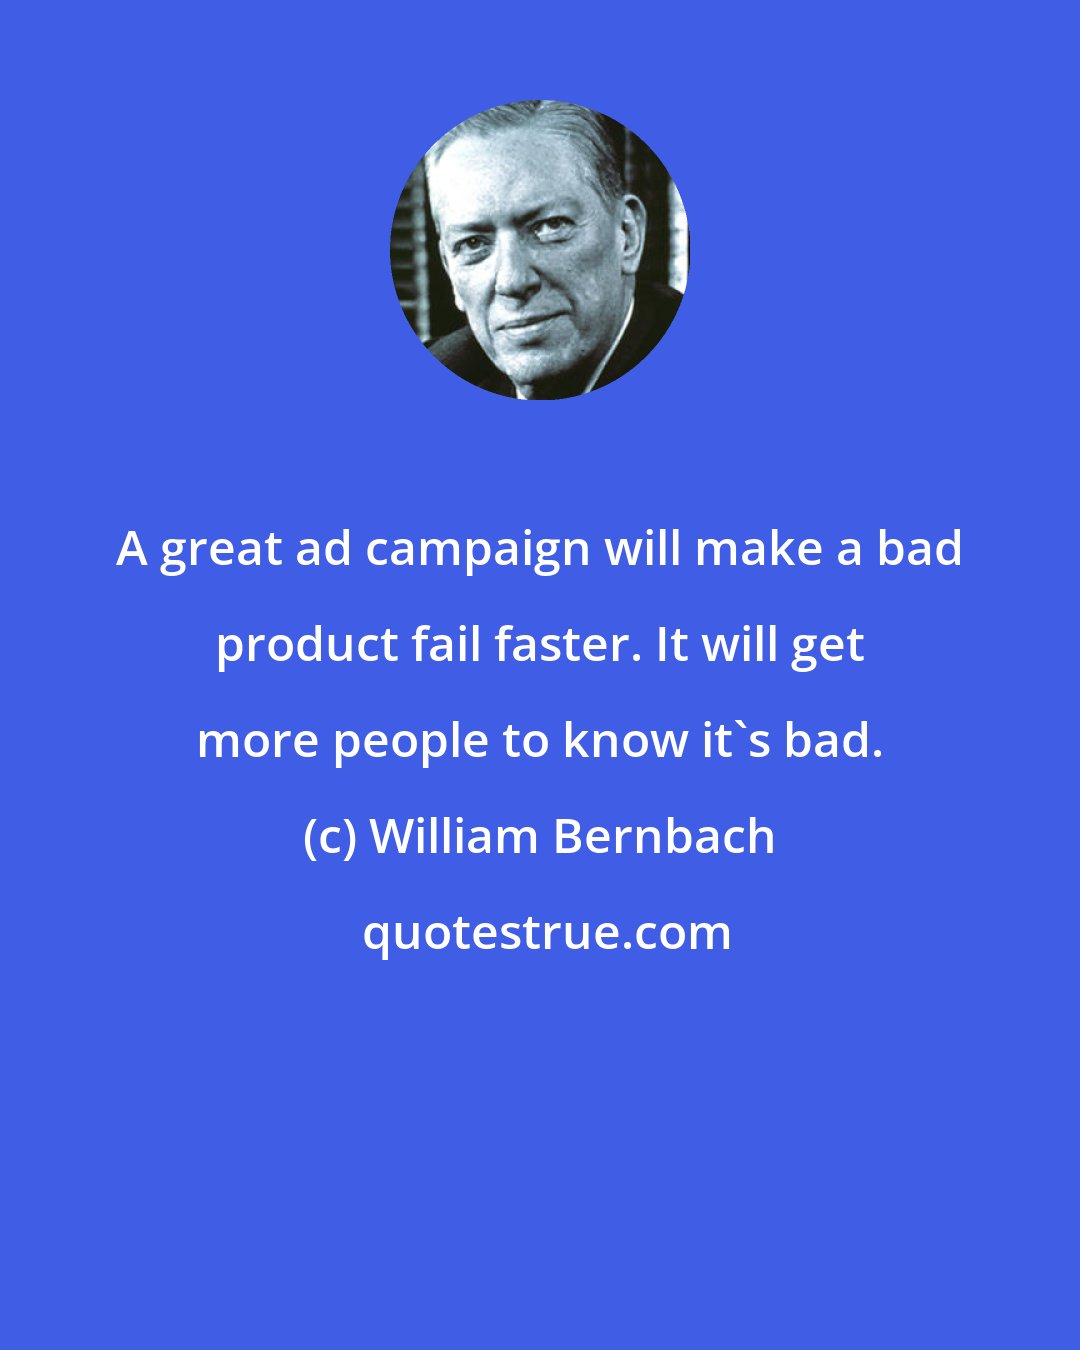 William Bernbach: A great ad campaign will make a bad product fail faster. It will get more people to know it's bad.